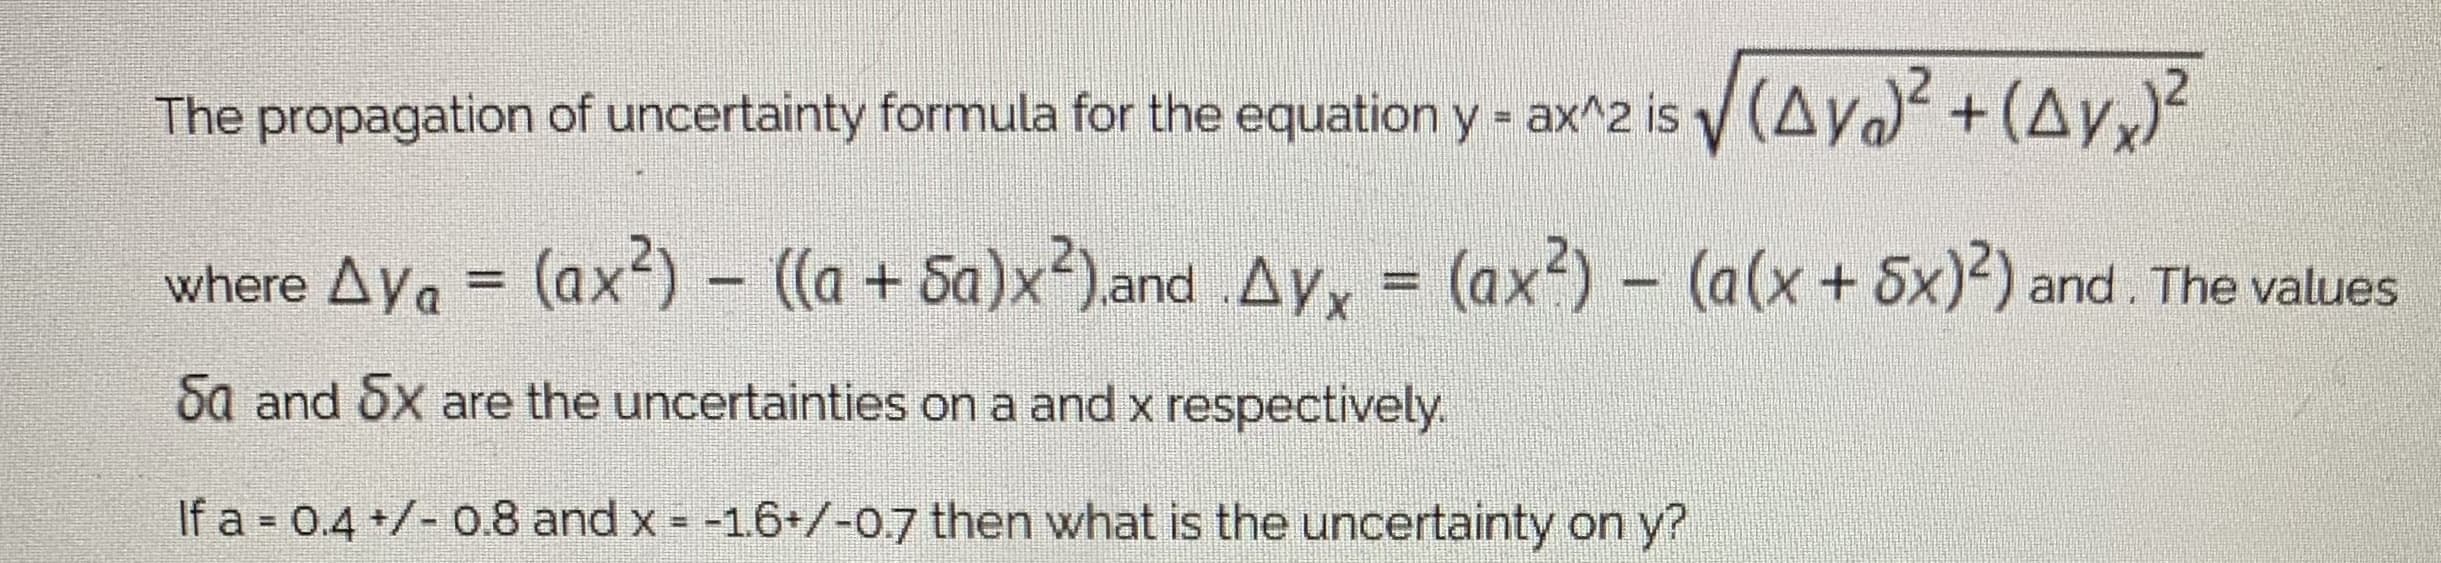 The propagation of uncertainty formula for the equation y - ax^2 is y (Ay +(Ay,)²
where Aya = (ax²) – ((a + Sa)x²).and .Ayx = (ax?) - (a(x+ 5x)²) and. The values
%3D
%3D
Sa and 5x are the uncertainties on a and x respectively.
If a = 0.4 +/- 0.8 and x = -1.6+/-0.7 then what is the uncertainty on y?
